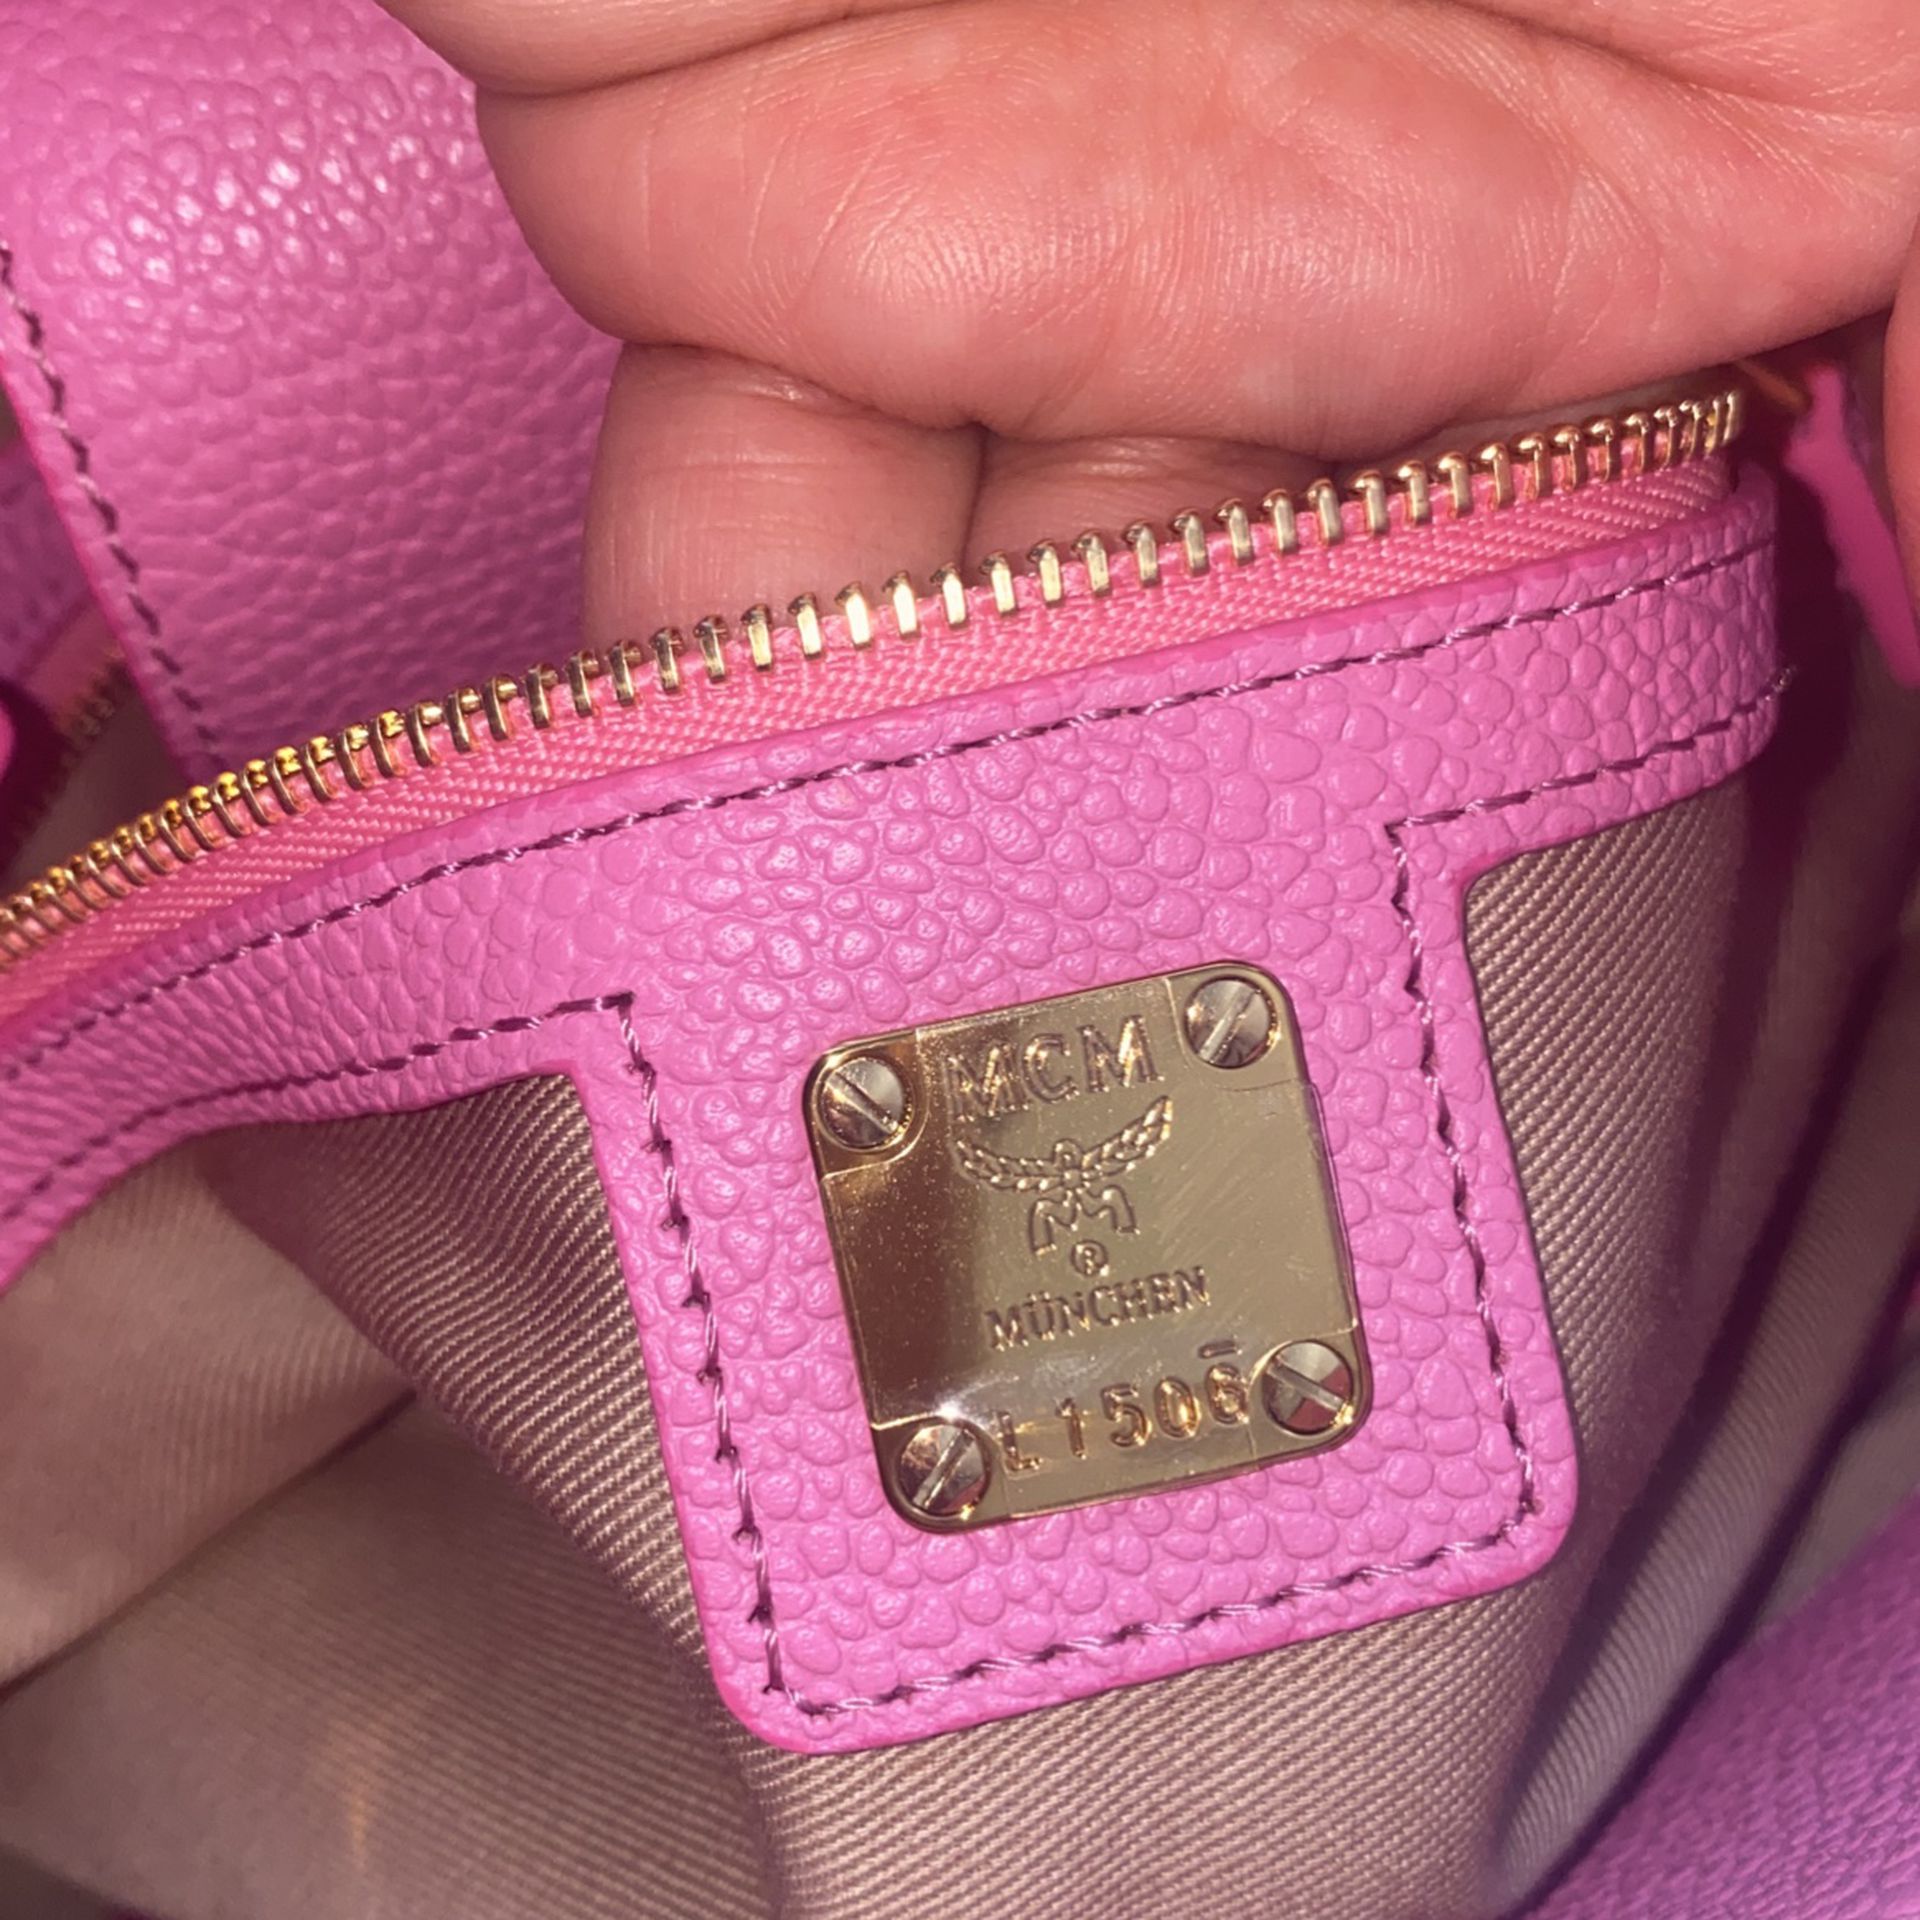 Authentic Mcm Pink Handbag for Sale in Hawthorne, CA - OfferUp